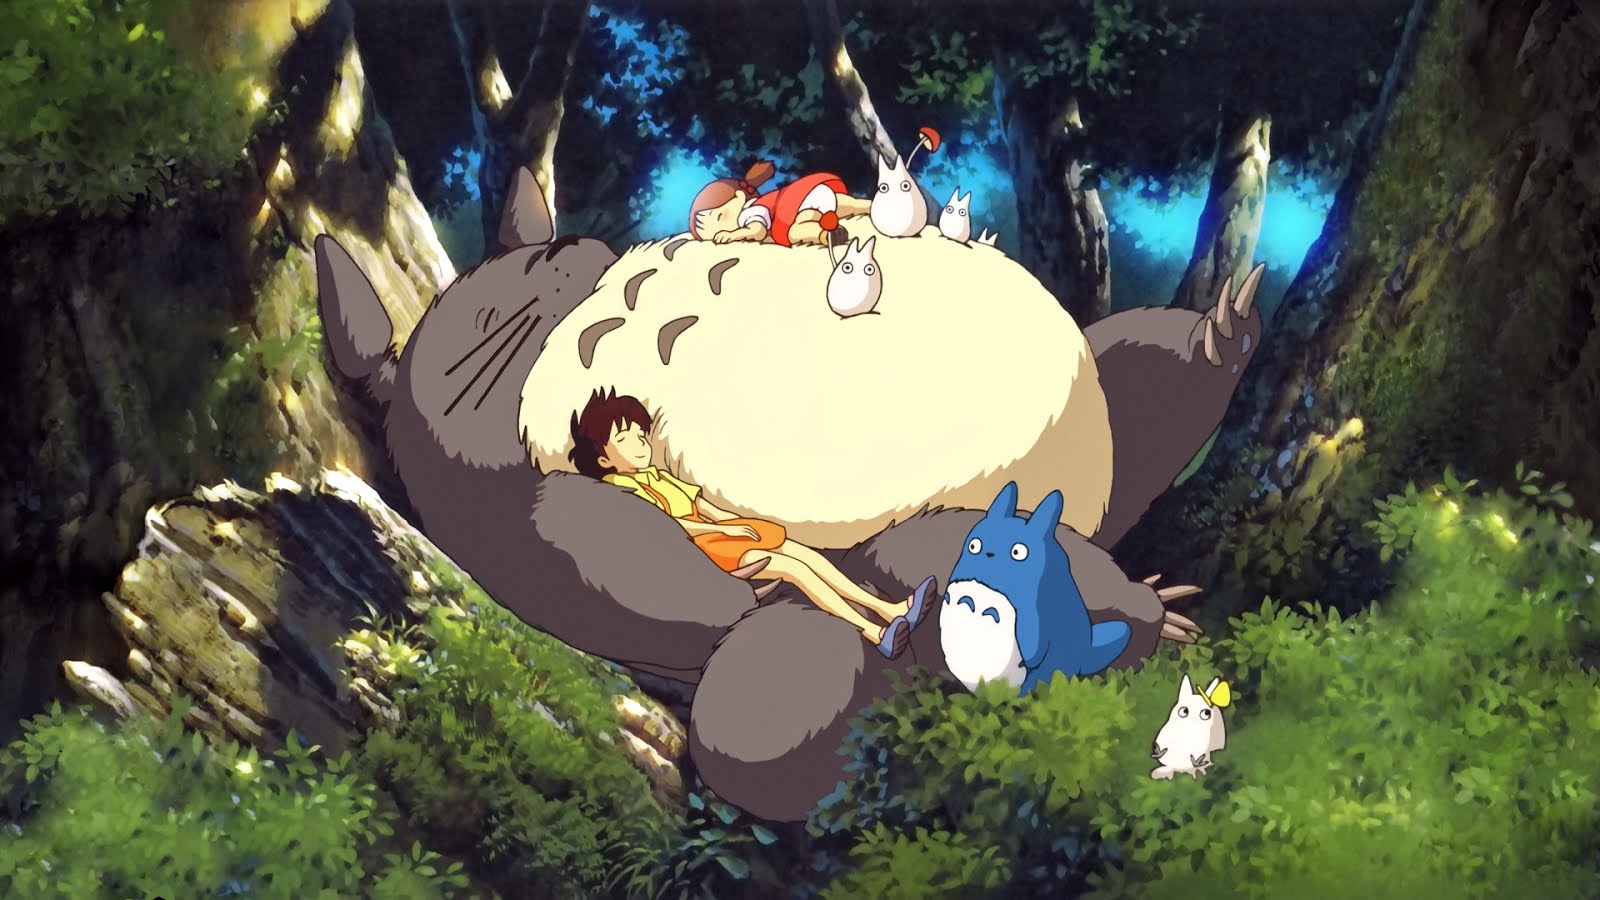 So let's move on to something a little more lighthearted and more expressive about the joys of childhood, instead. Yes, it's My Neighbor Totoro (Tonari no ...